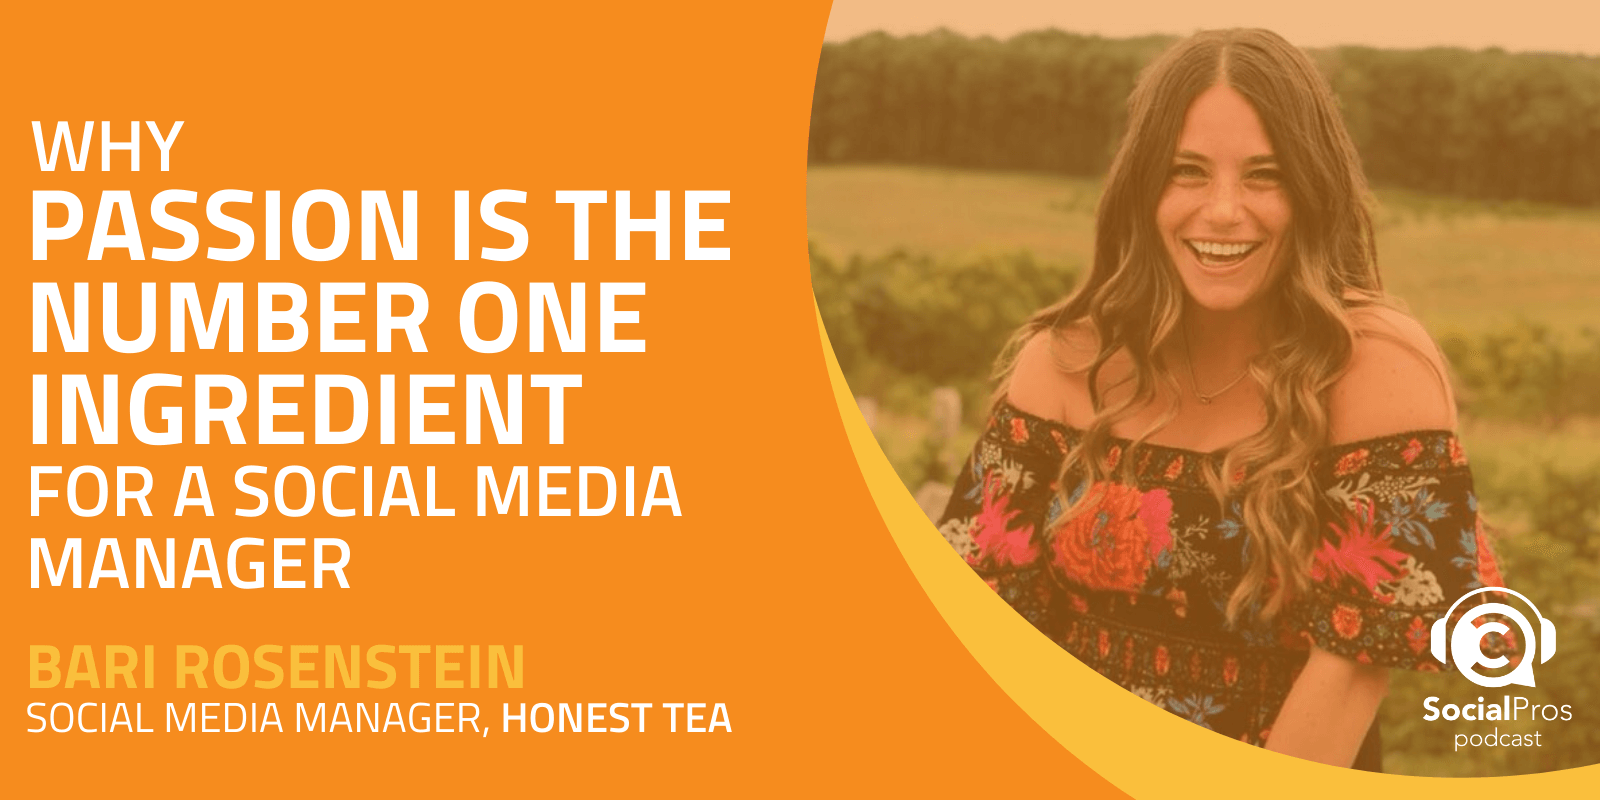 Why Passion is the Number One Ingredient for a Social Media Manager